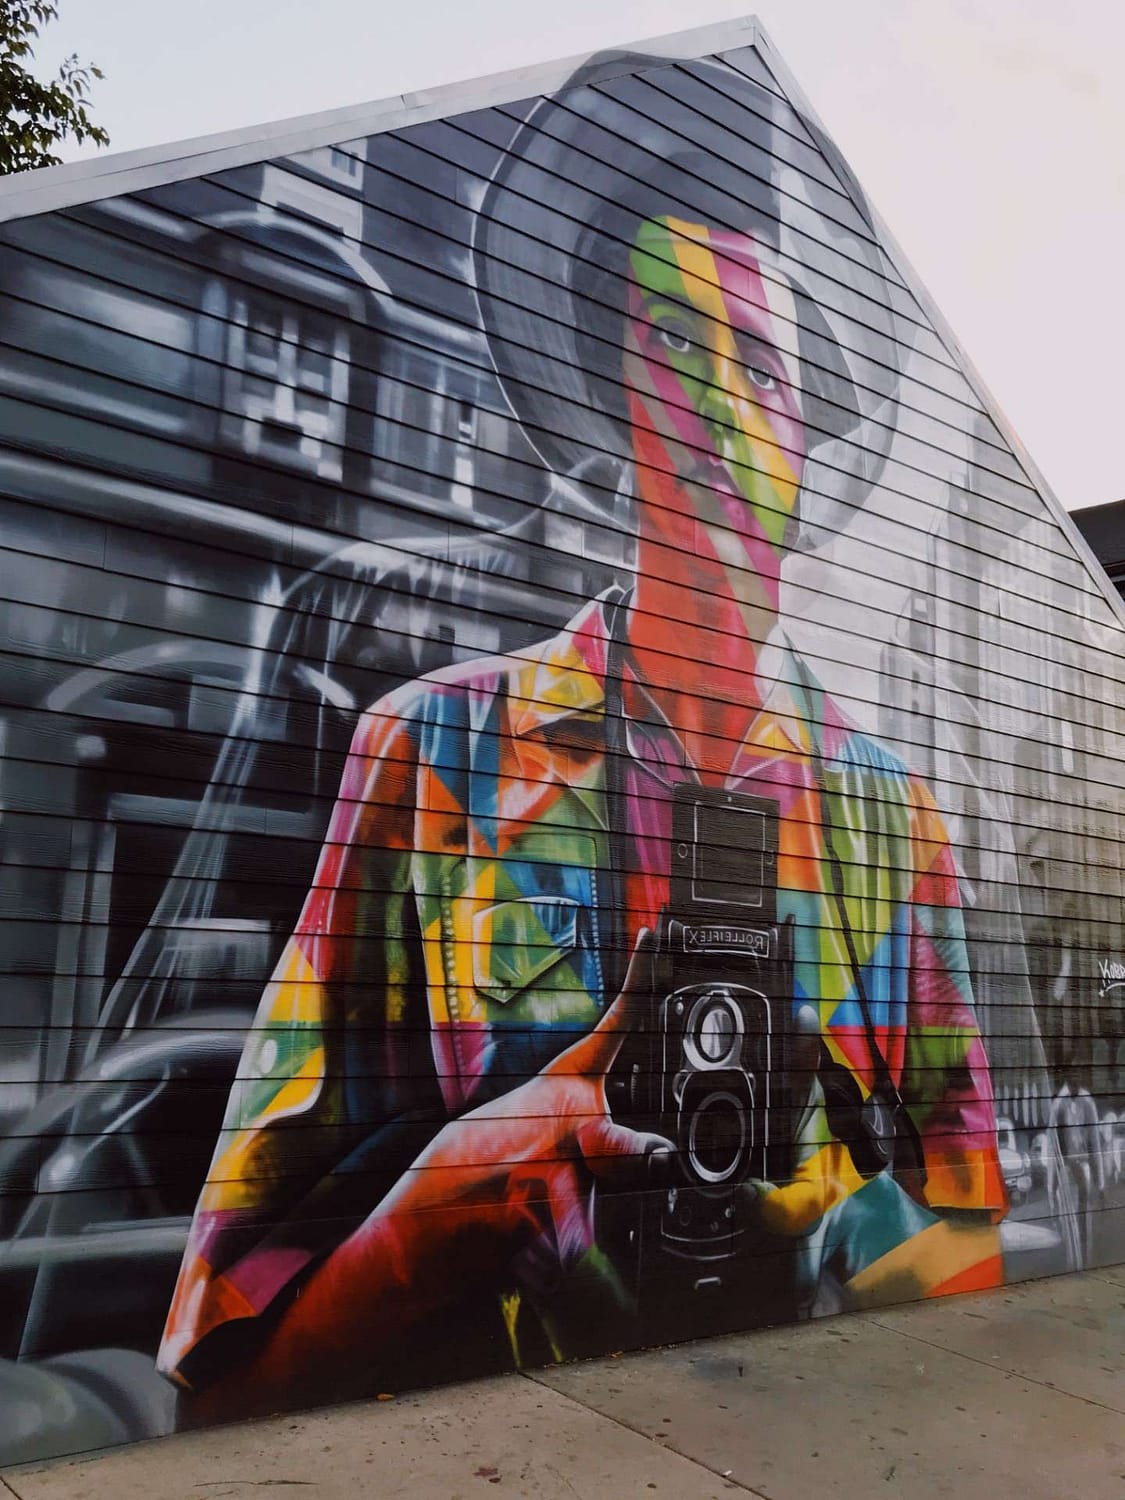 Wall size mural - a colorful painting of Vivian Maier's old black and white selfie photograph.